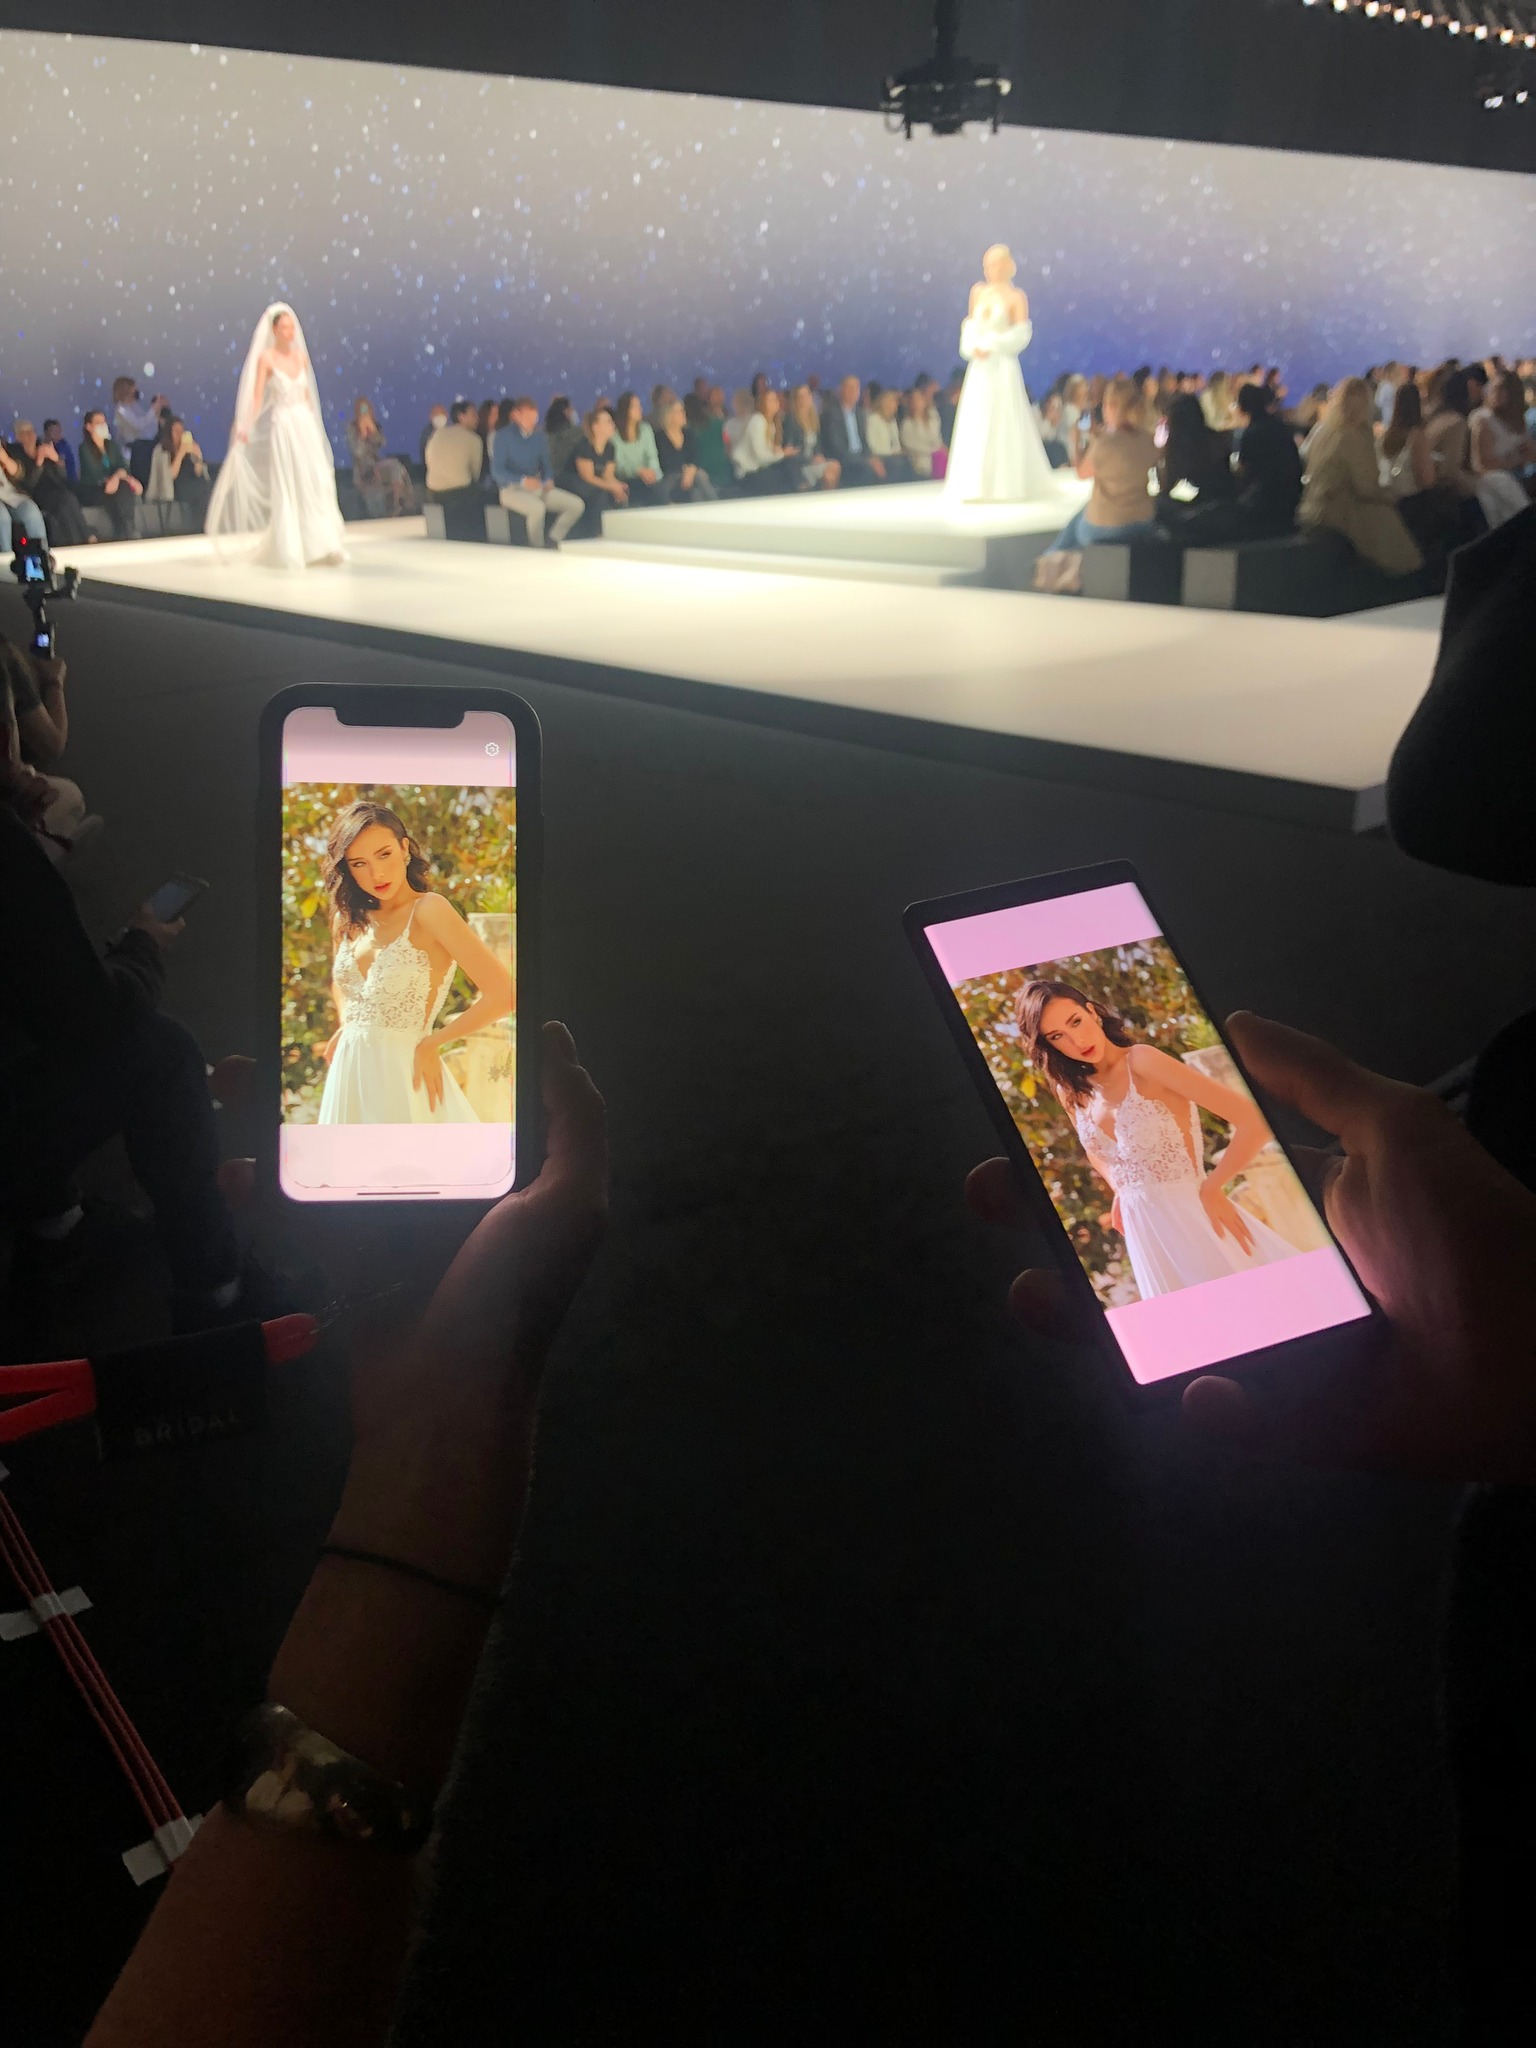 BBFW 2022 once again takes centre stage on the global bridal